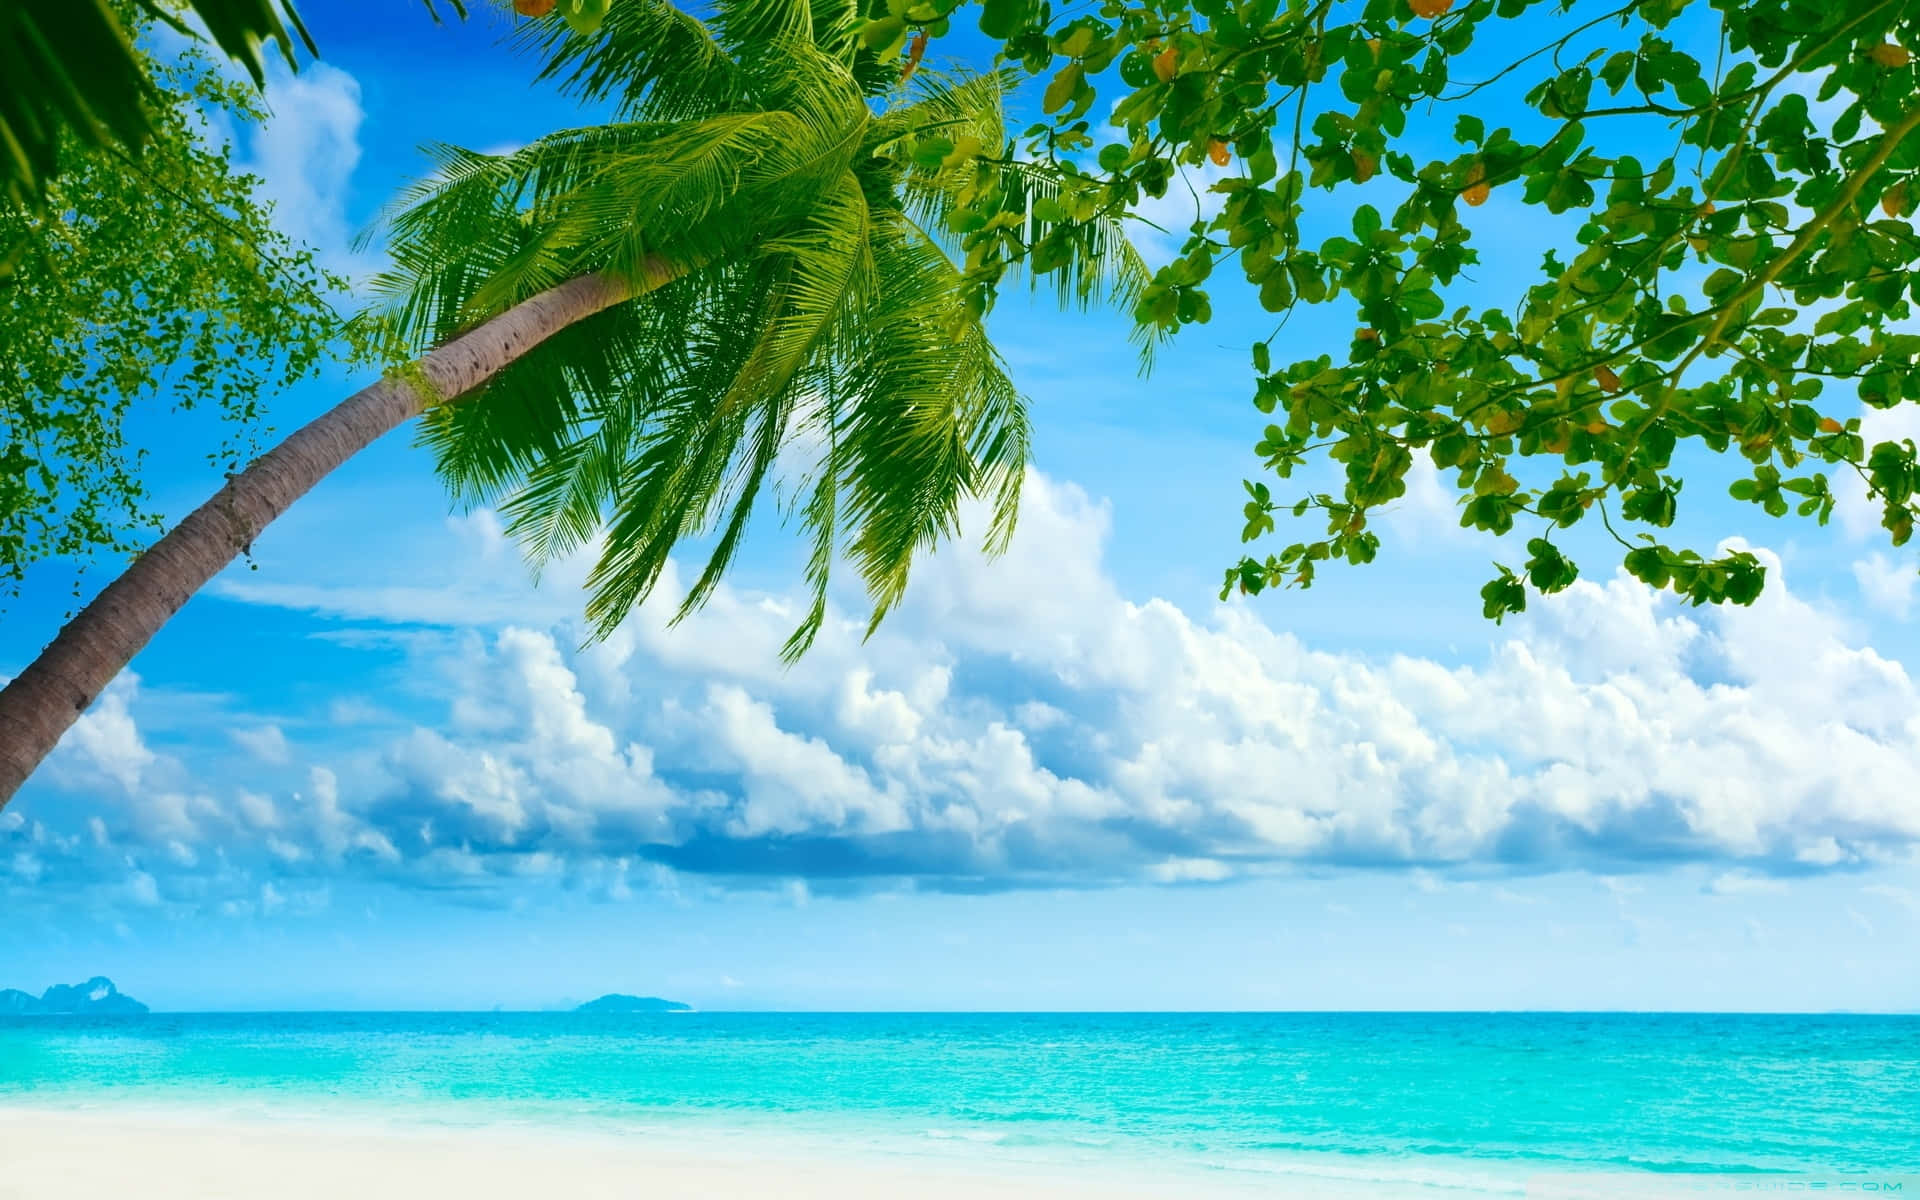 A simply stunning tropical beach scene with beach cabanas, palm trees, and crystal blue water. Wallpaper